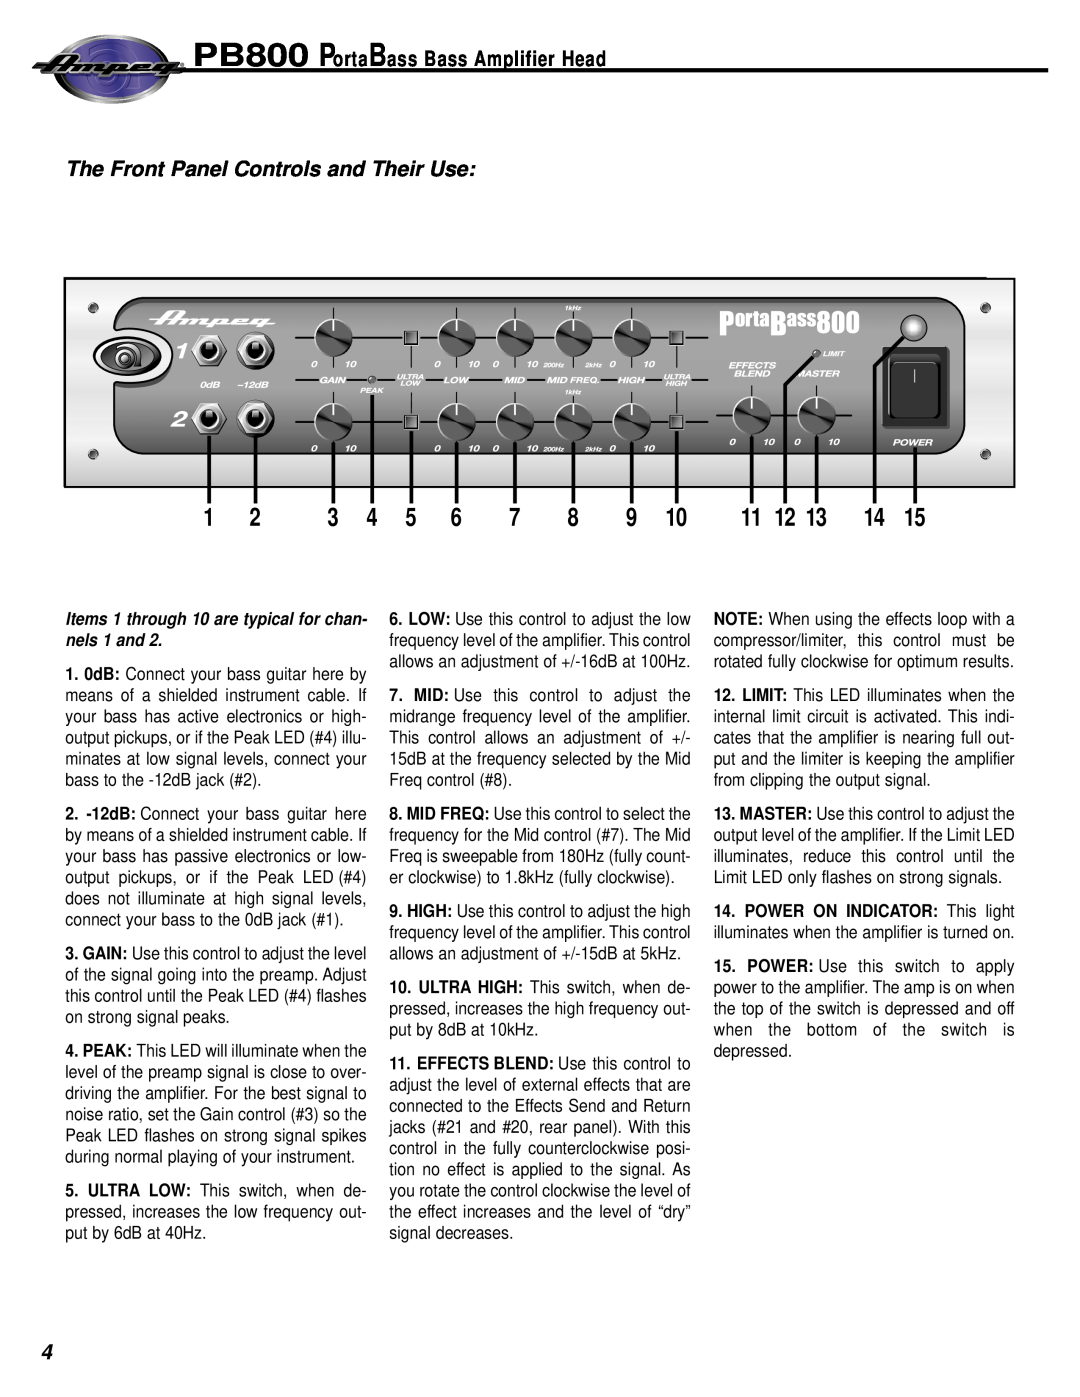 Ampeg PortaBass800 manual The Front Panel Controls and Their Use, PB800 PortaBass Bass Amplifier Head 